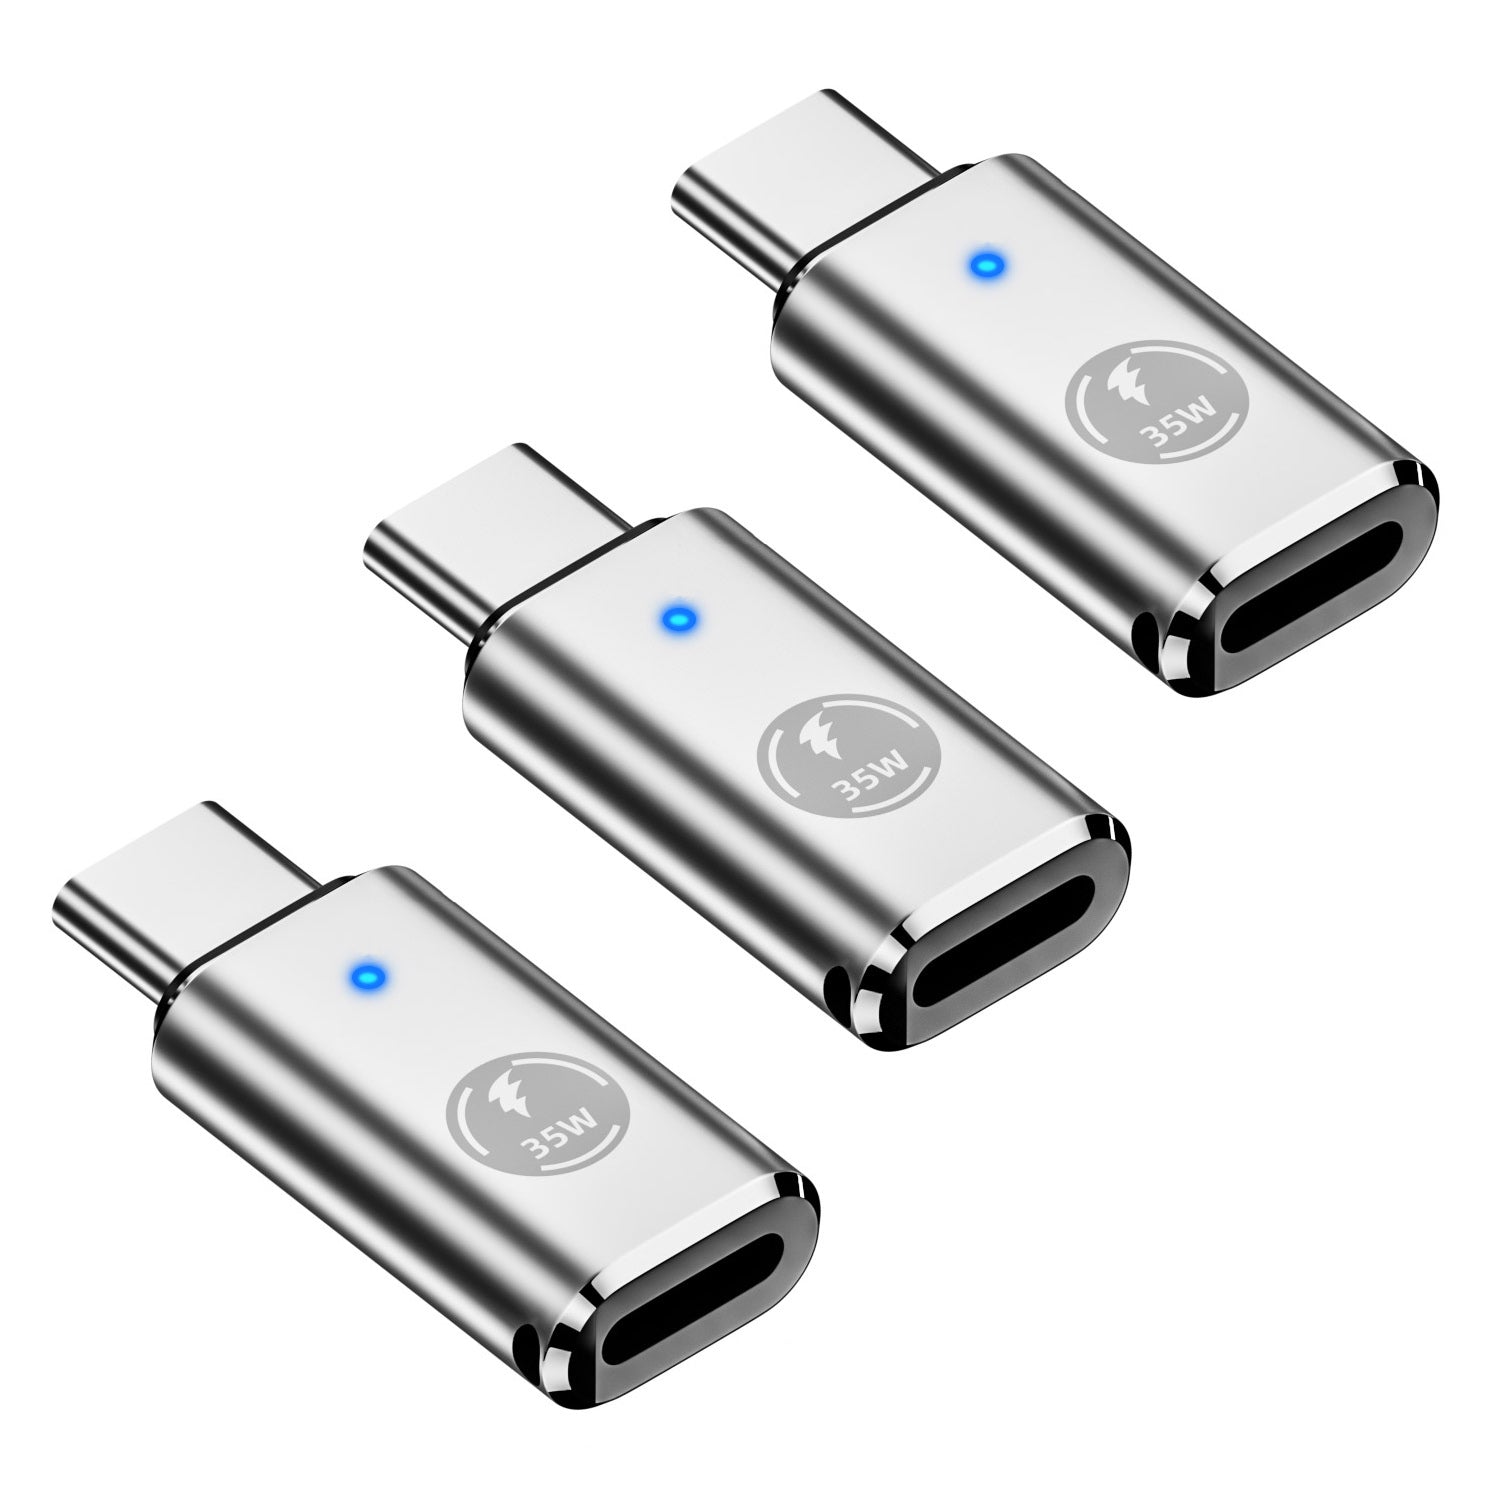 Lighting to Type C Adapters (3-Pack)